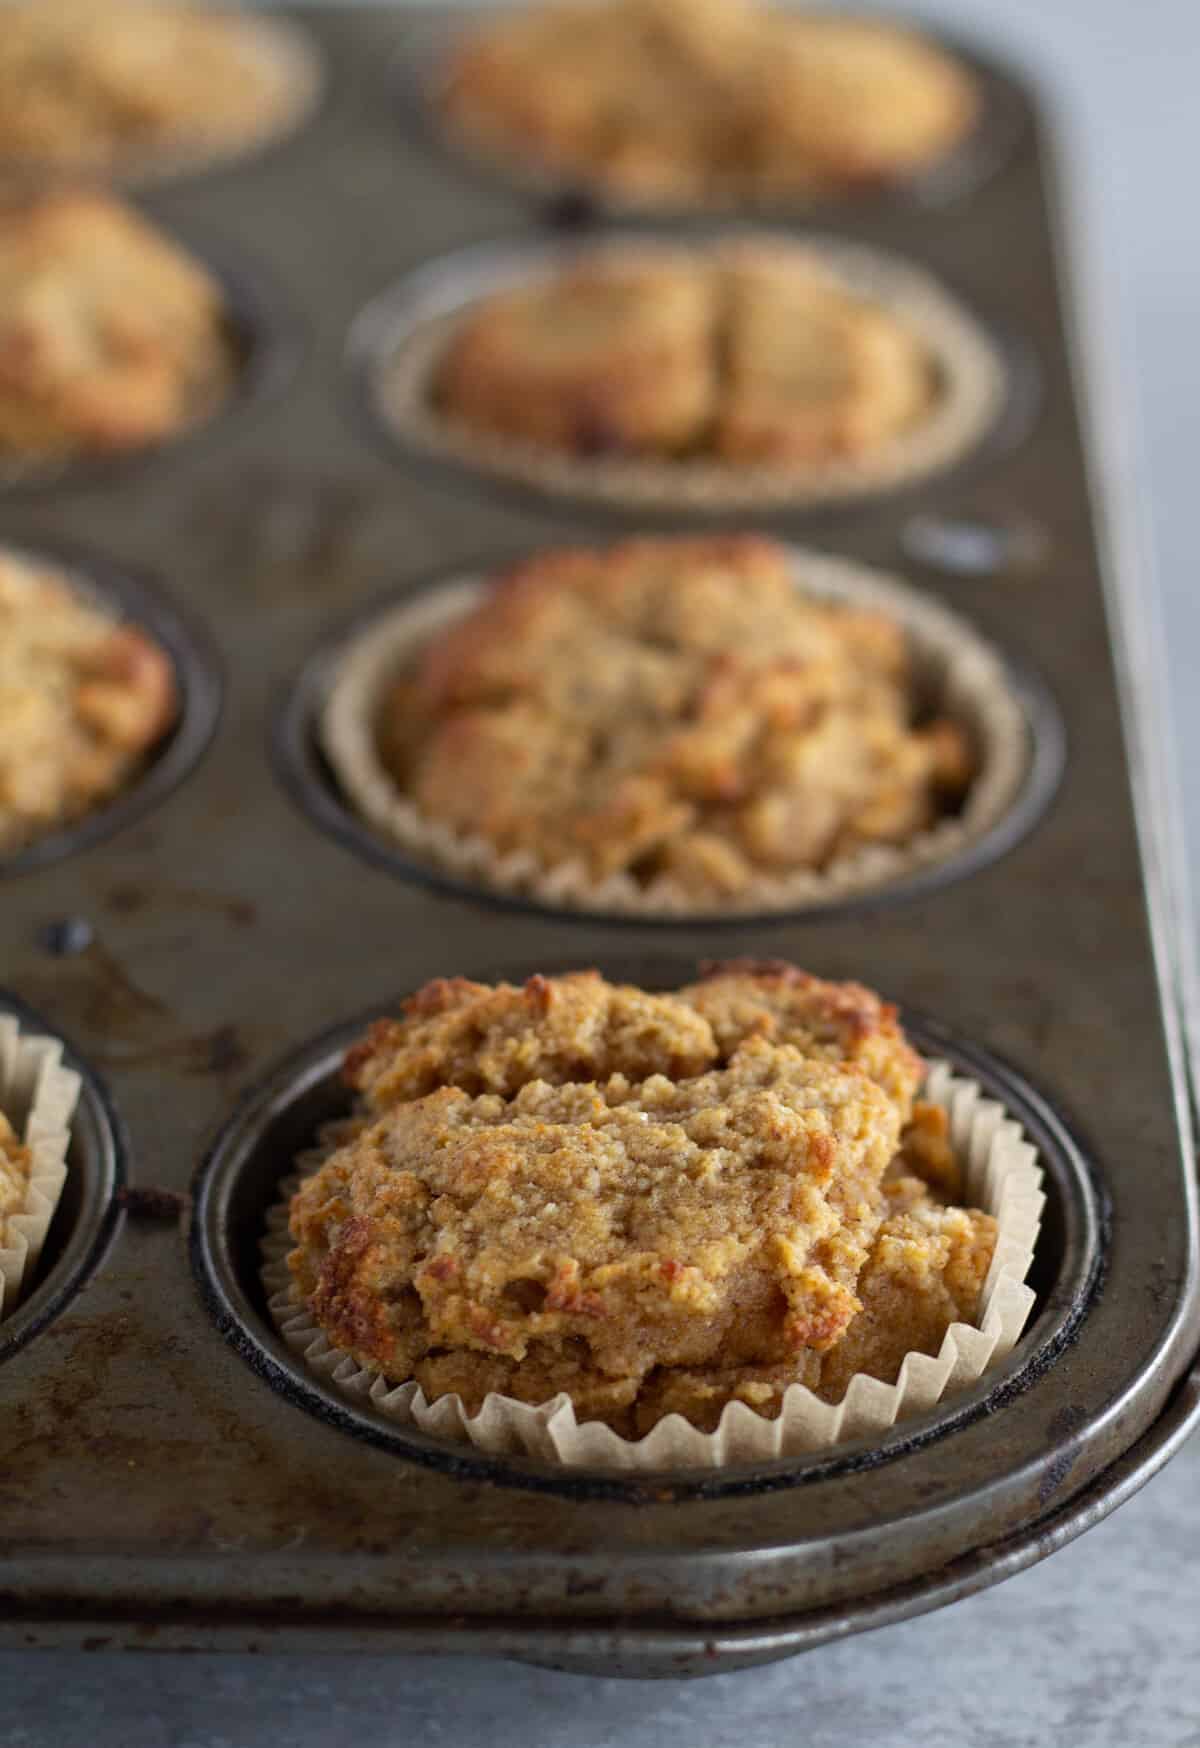 Baked cupcakes while still in muffin tin